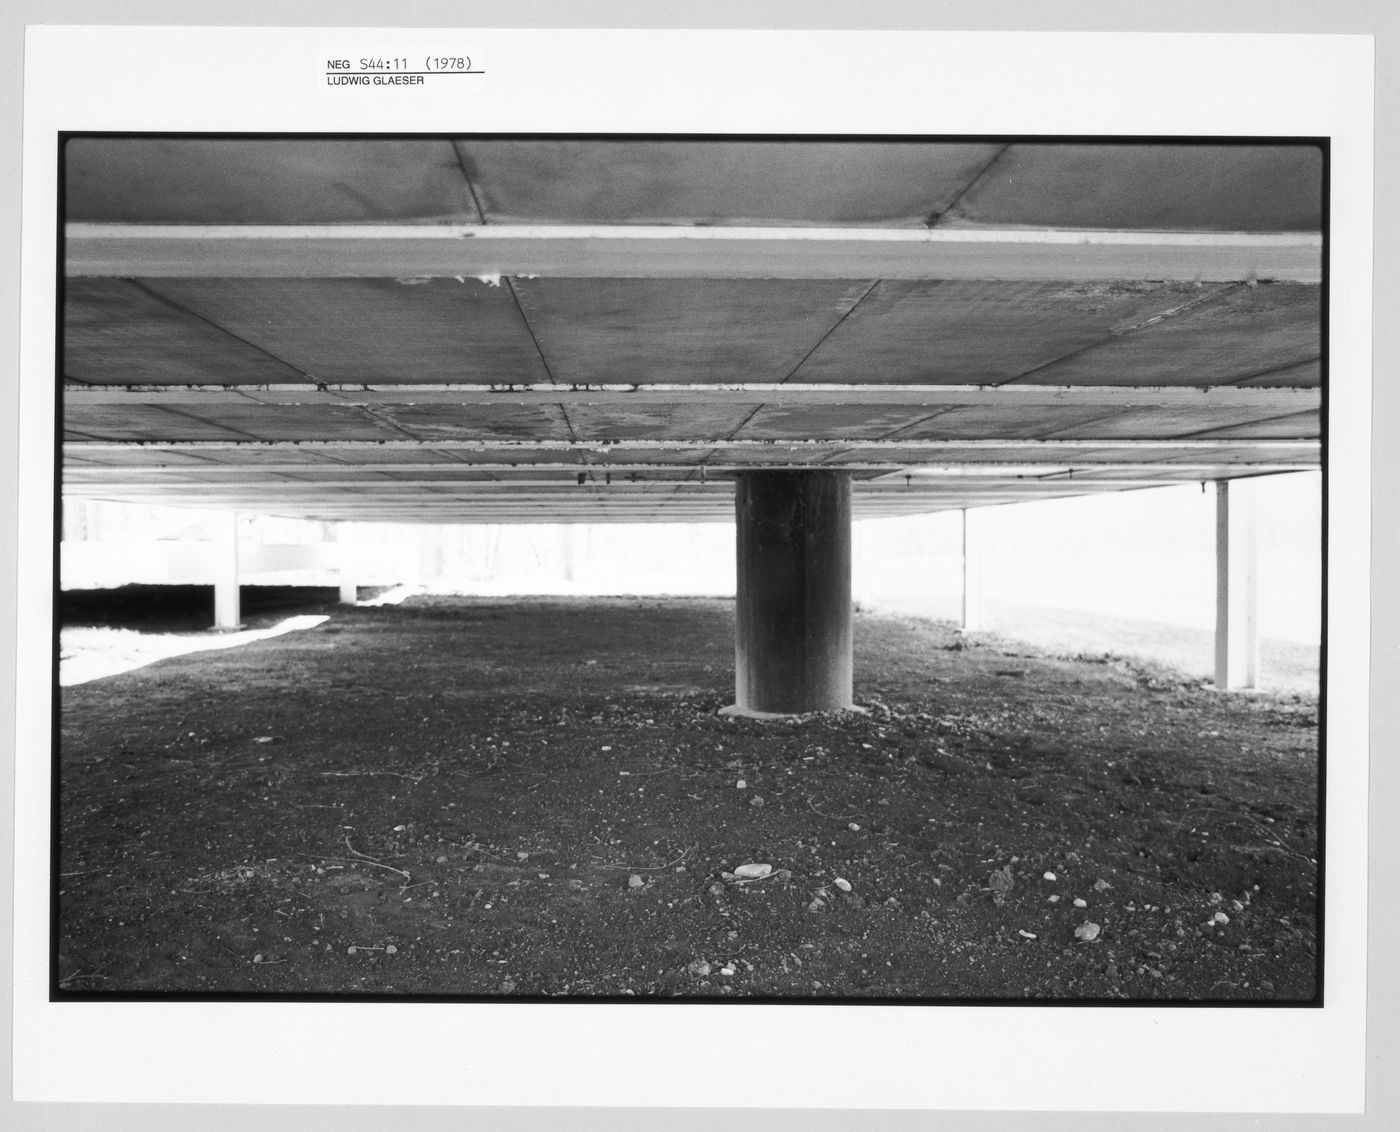 View of supporting structures under Farnsworth House, Plano, Illinois, United States